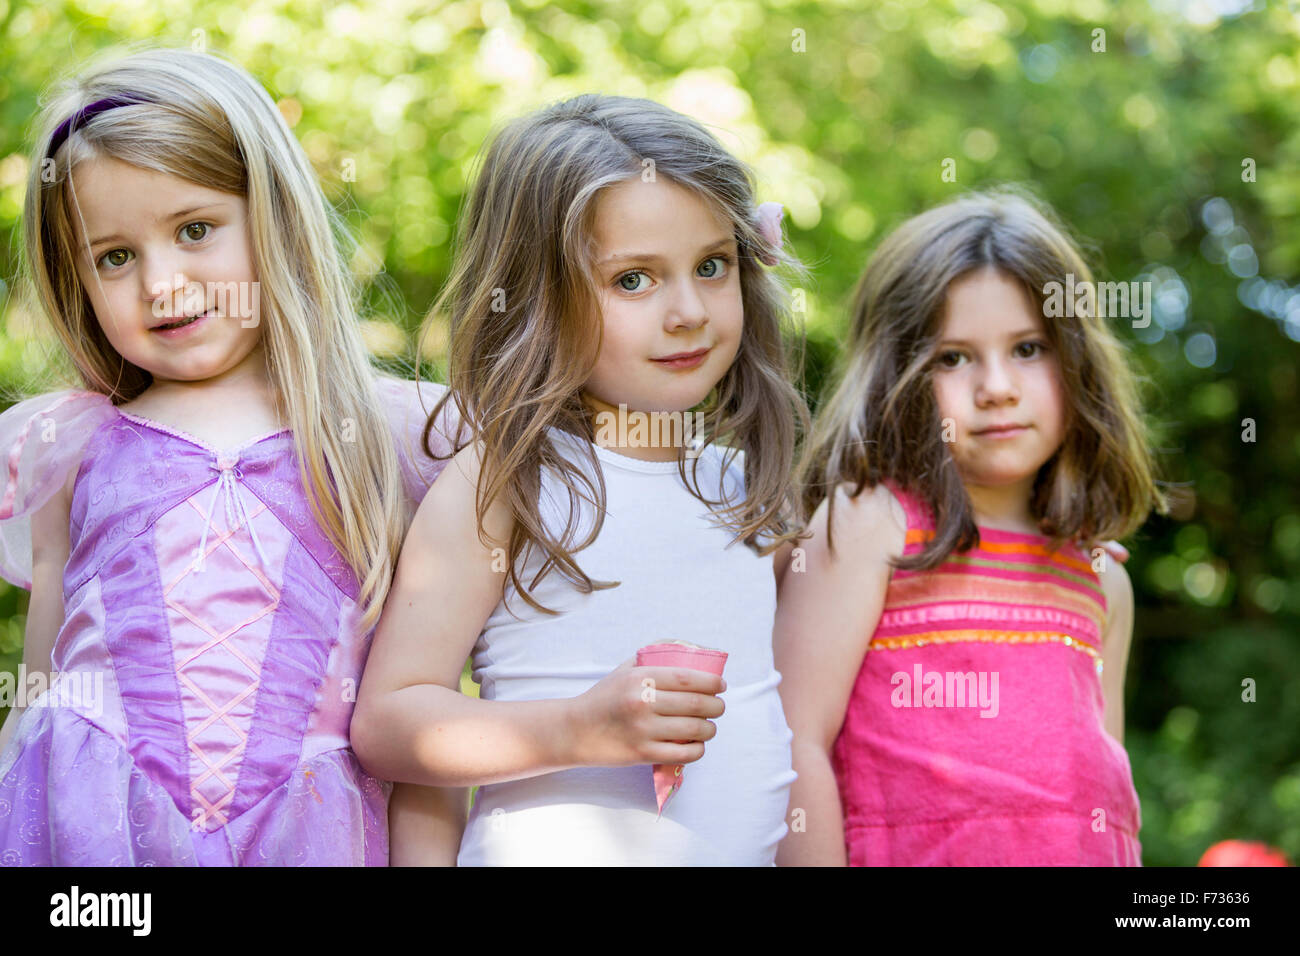 Three smiling young girls at a garden party. Stock Photo